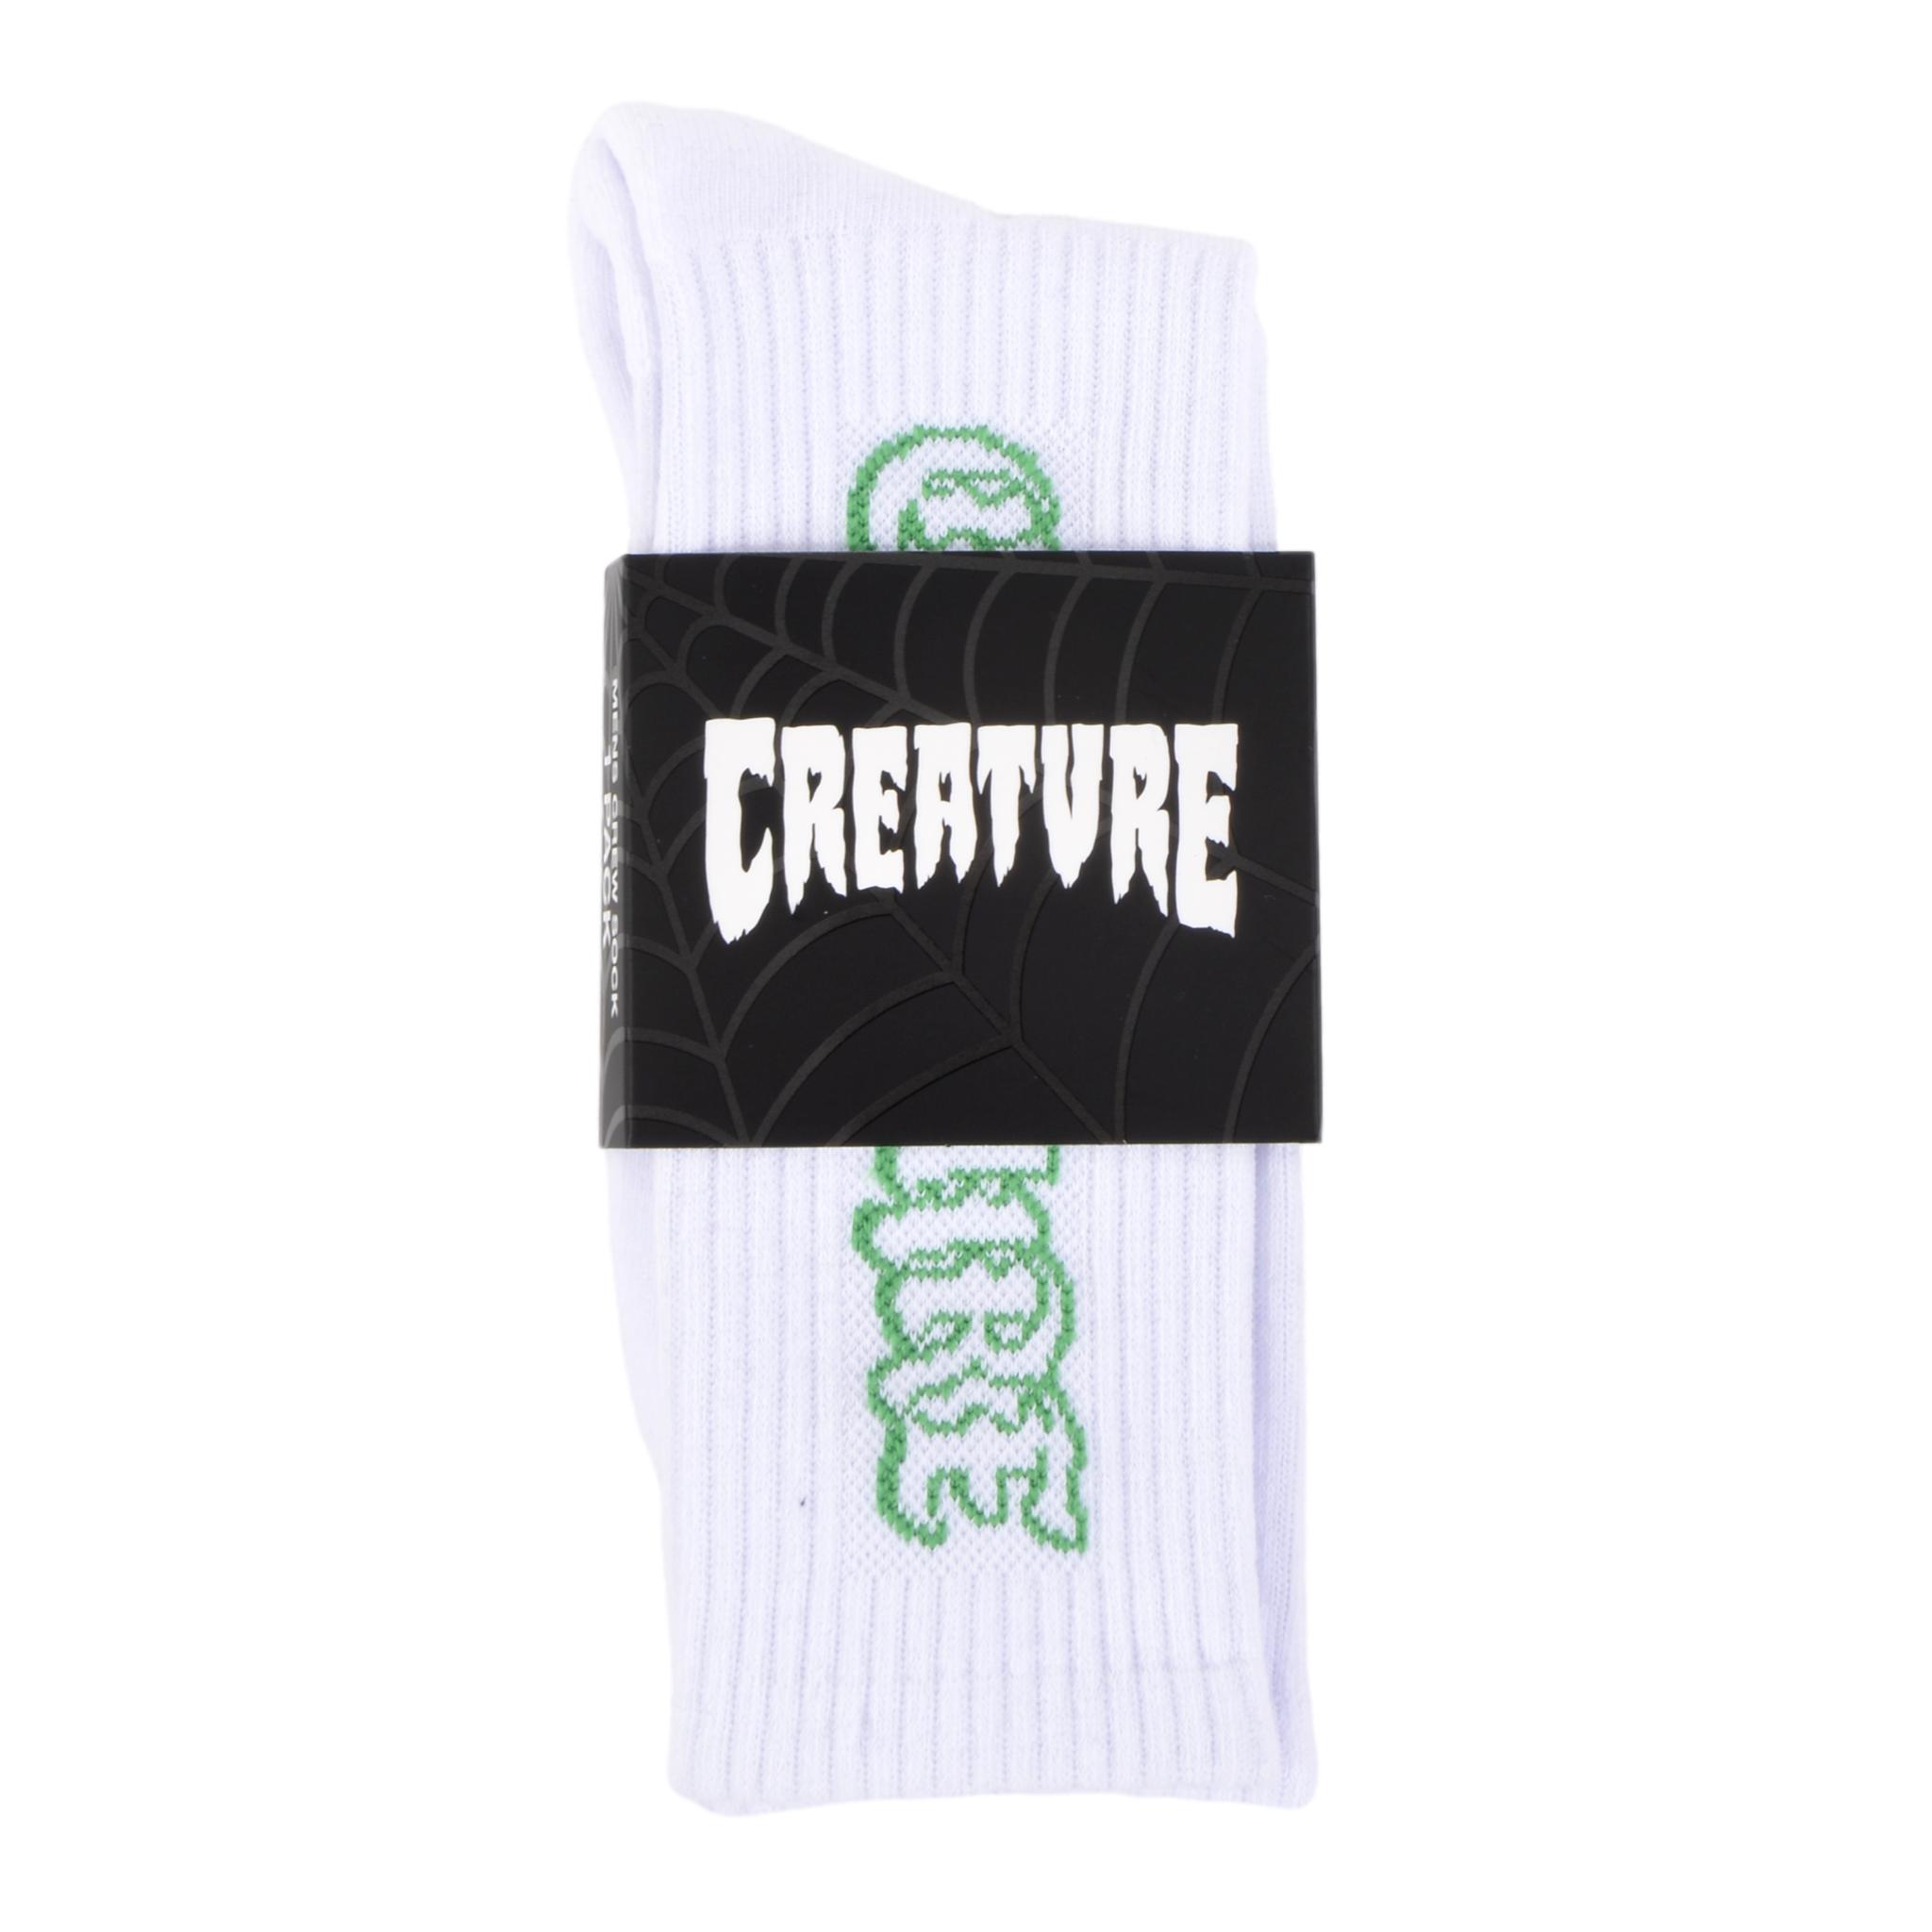 Creature White Socks To The Grave